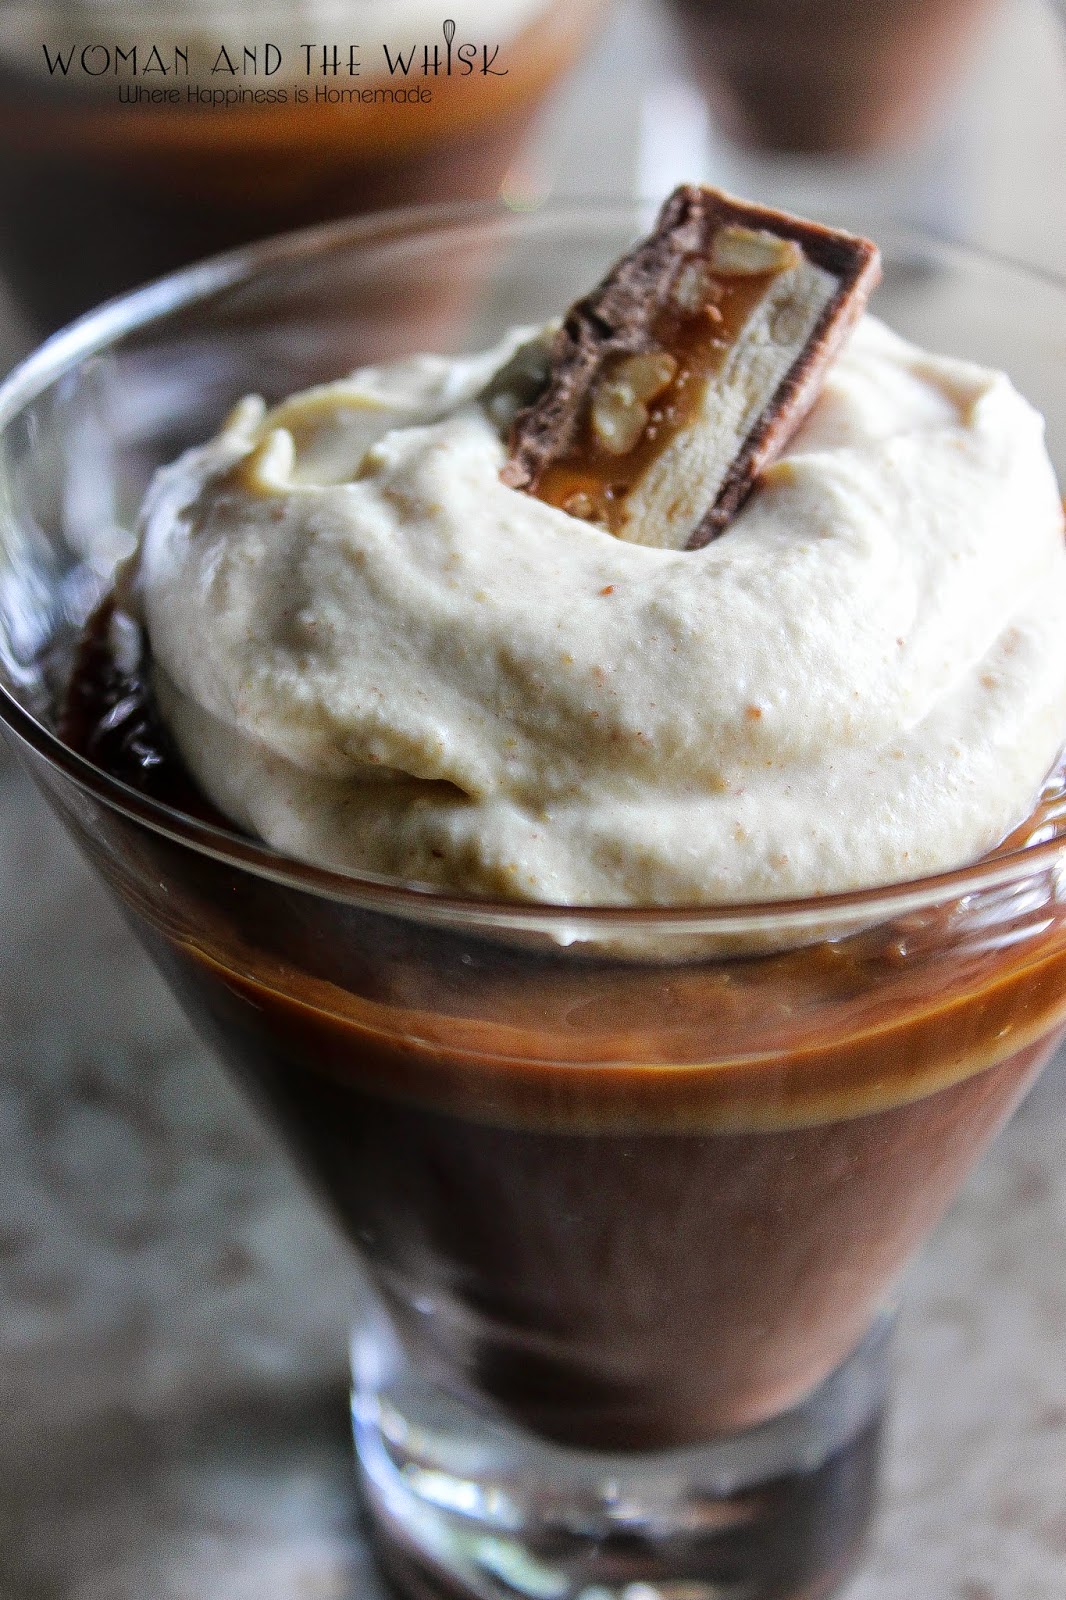 Woman and the Whisk: Snickers Pudding